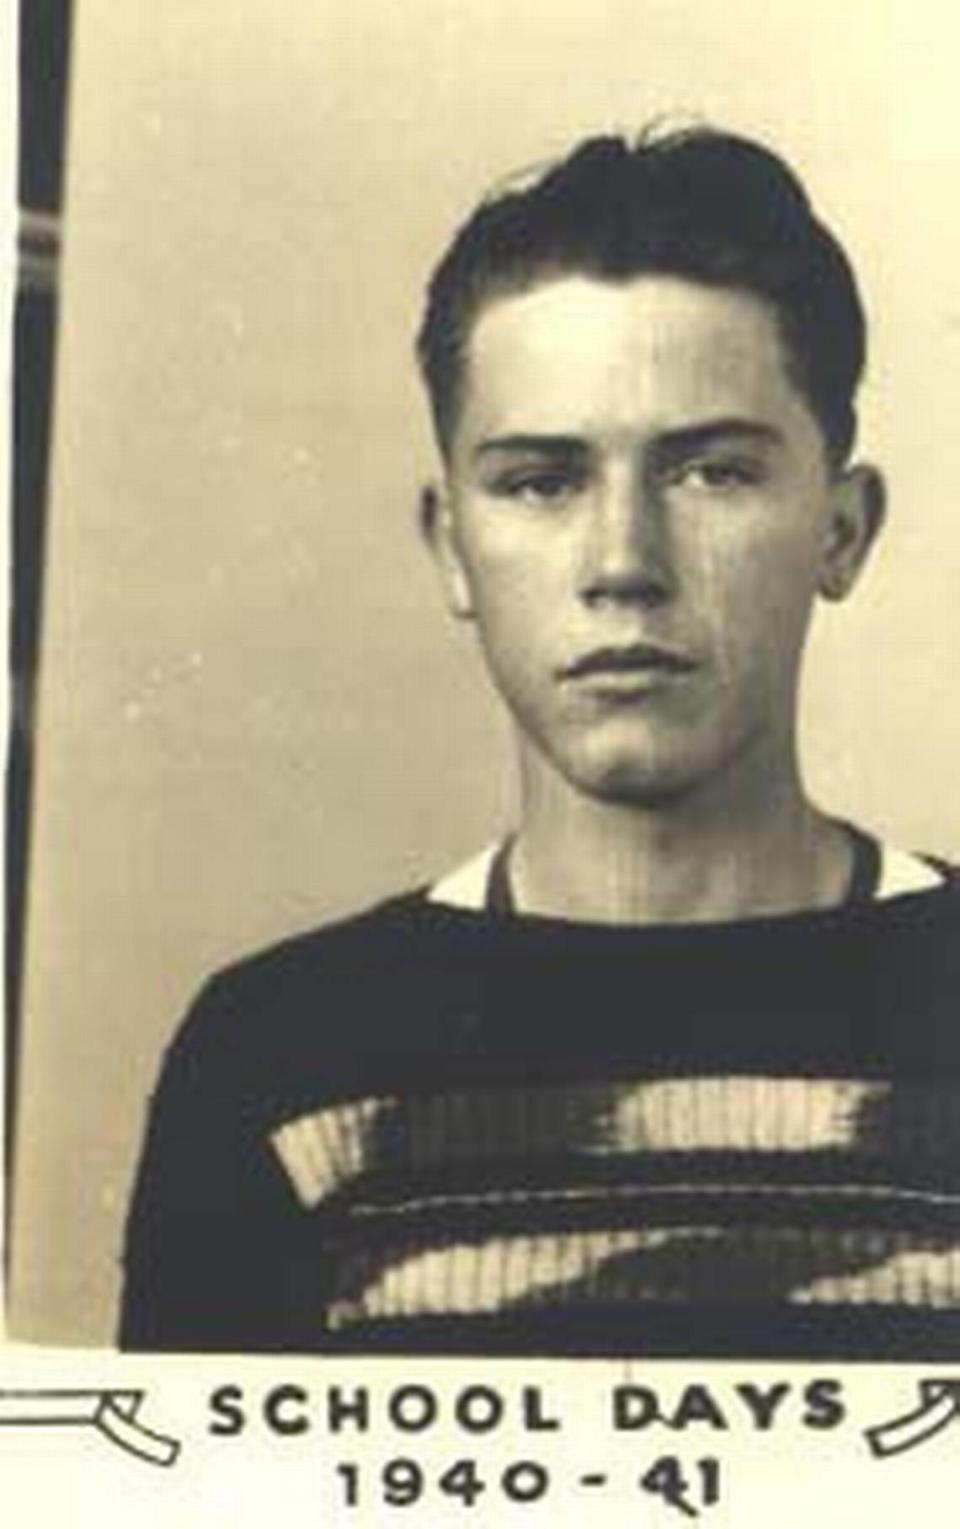 Paul Frederick while a student a Lafayette High School. He was scheduled to graduate in 1943 but left early to serve in the military. He was given his high school diploma on April 21, 2003.